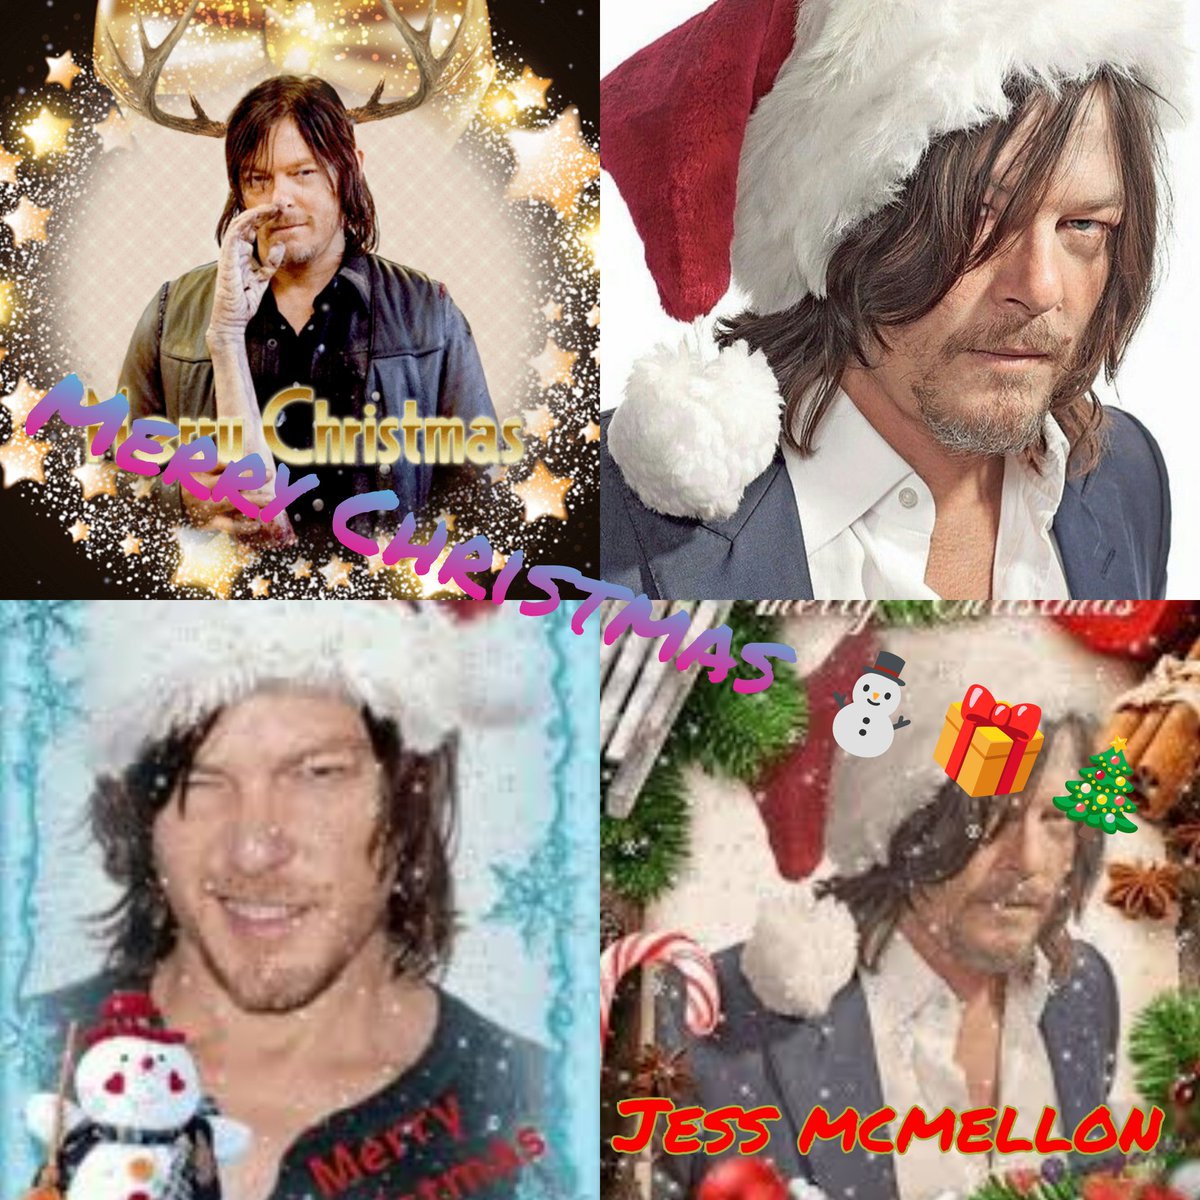 Merry Christmas and Happy New Year Greetings Norman and your beautiful family from all of us at Fort 🎄

@wwwbigbaldhead 

#NormanReedus #FortNormanReedus #SeasonsGreetings #MerryChristmas2023